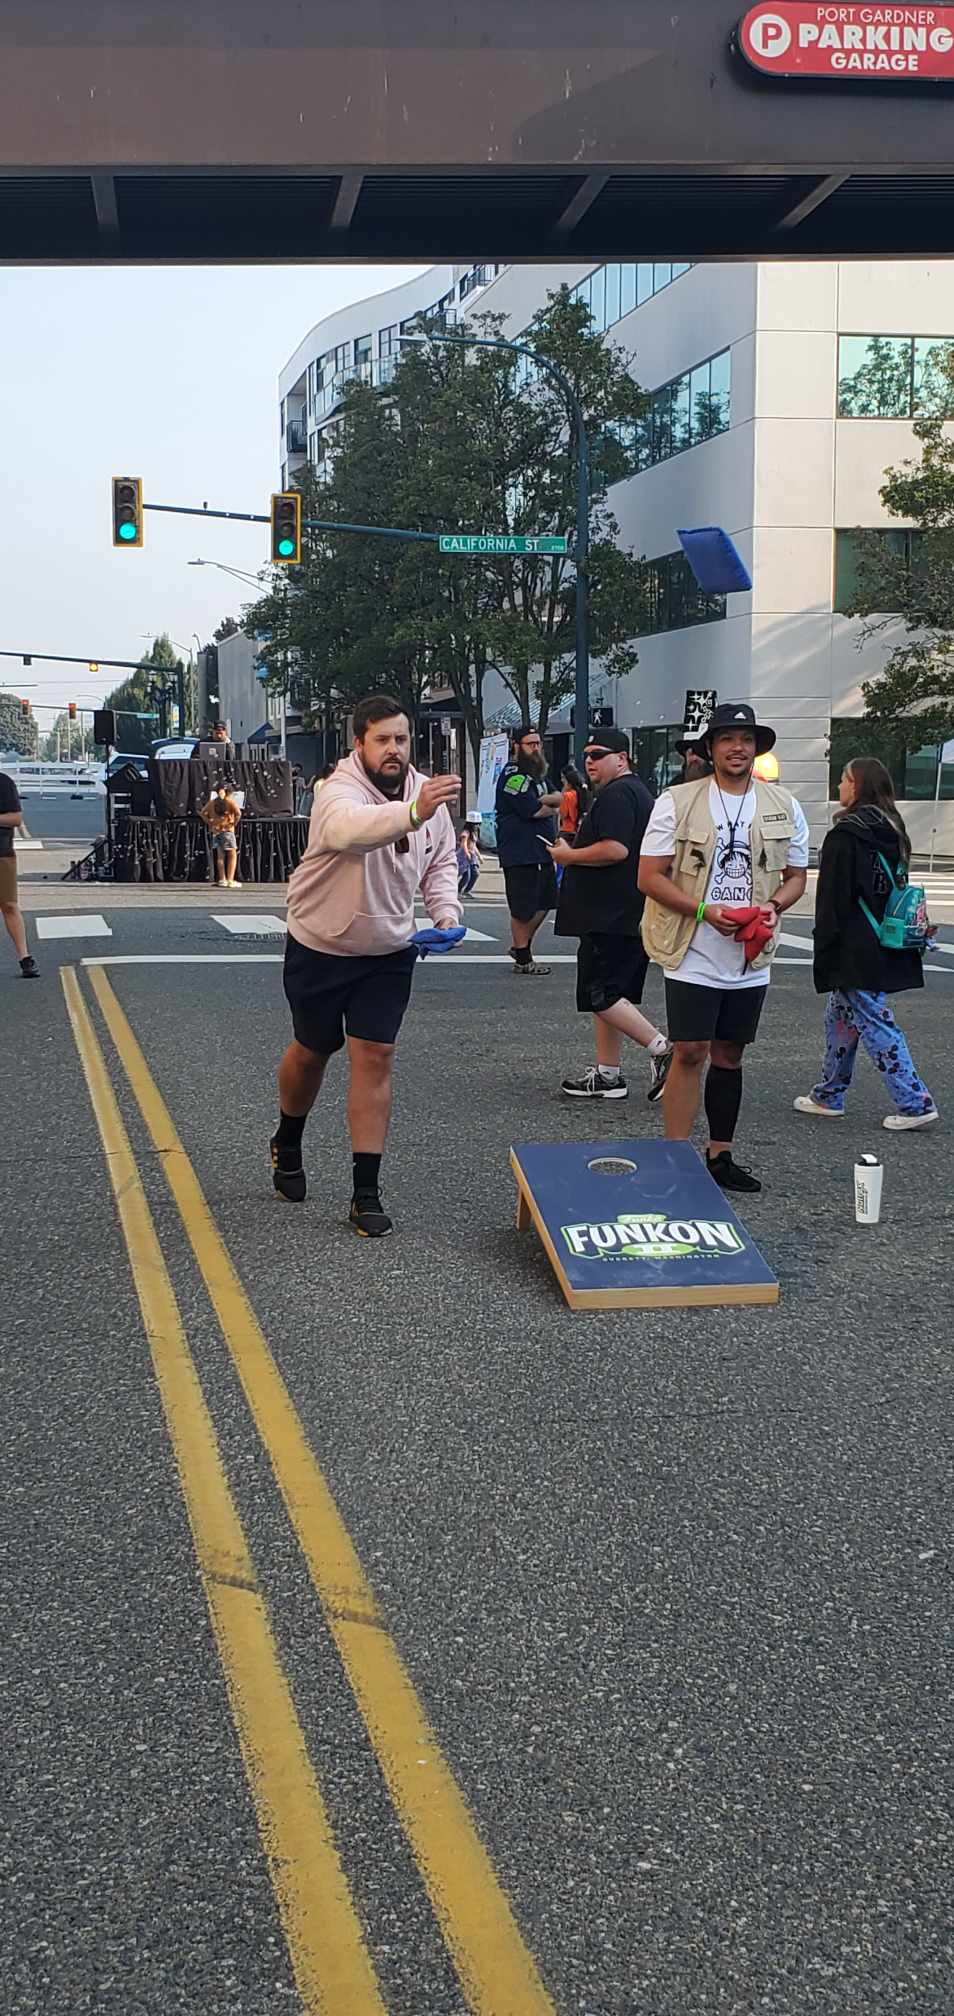 Corn Hole Toss: Funatics try their hand at tossing bean bags into targets on the street.